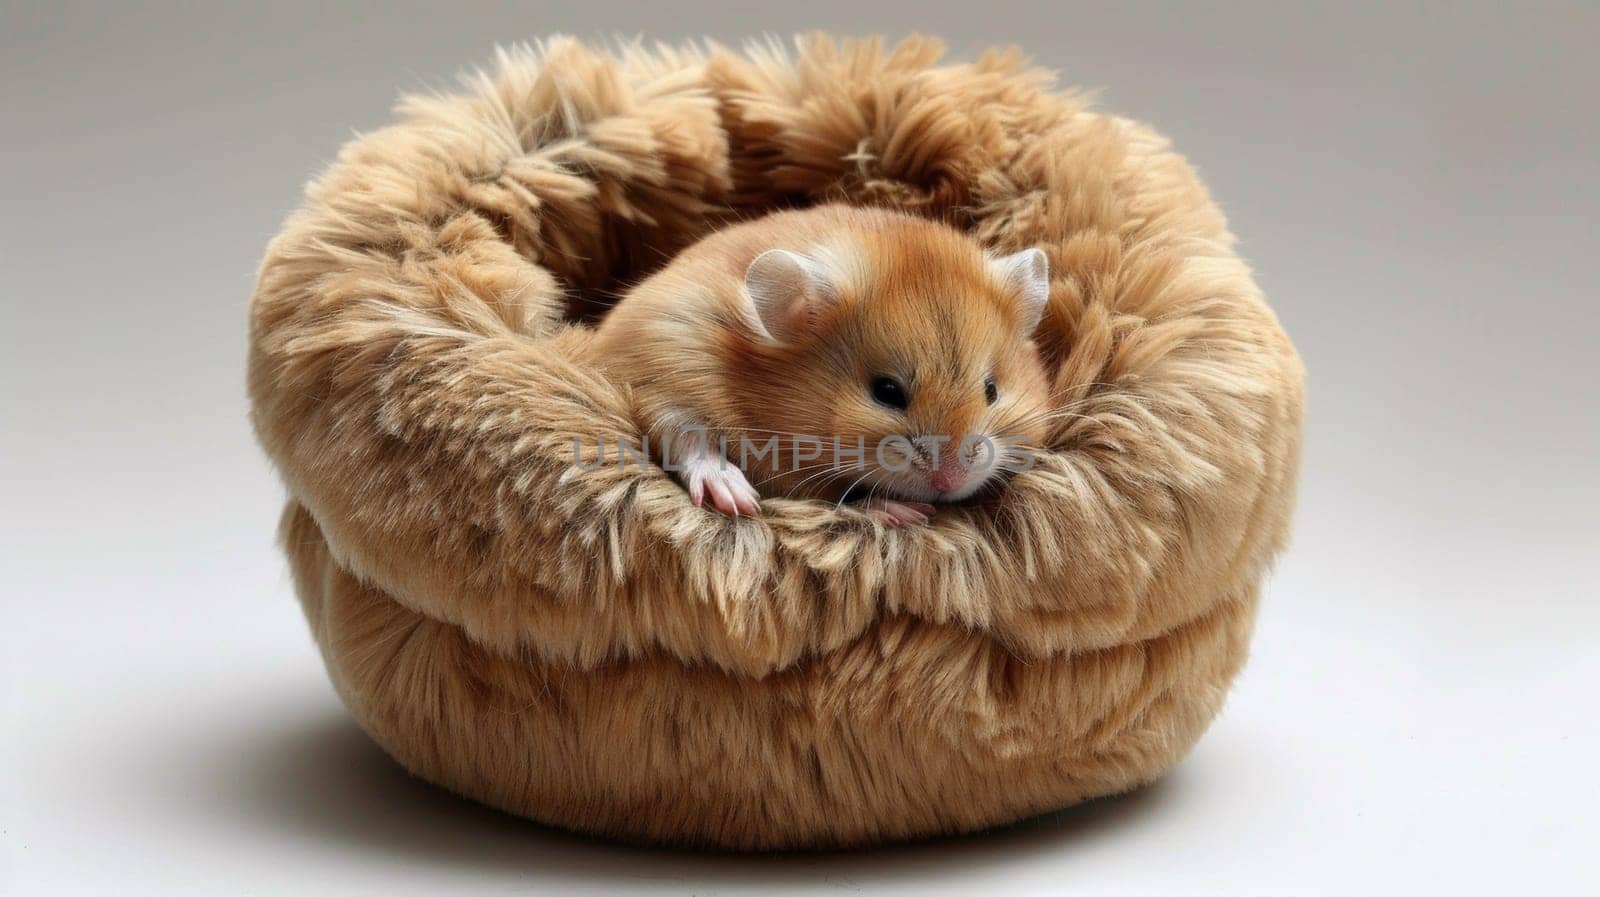 A small brown and white hamster sitting in a furry ball, AI by starush